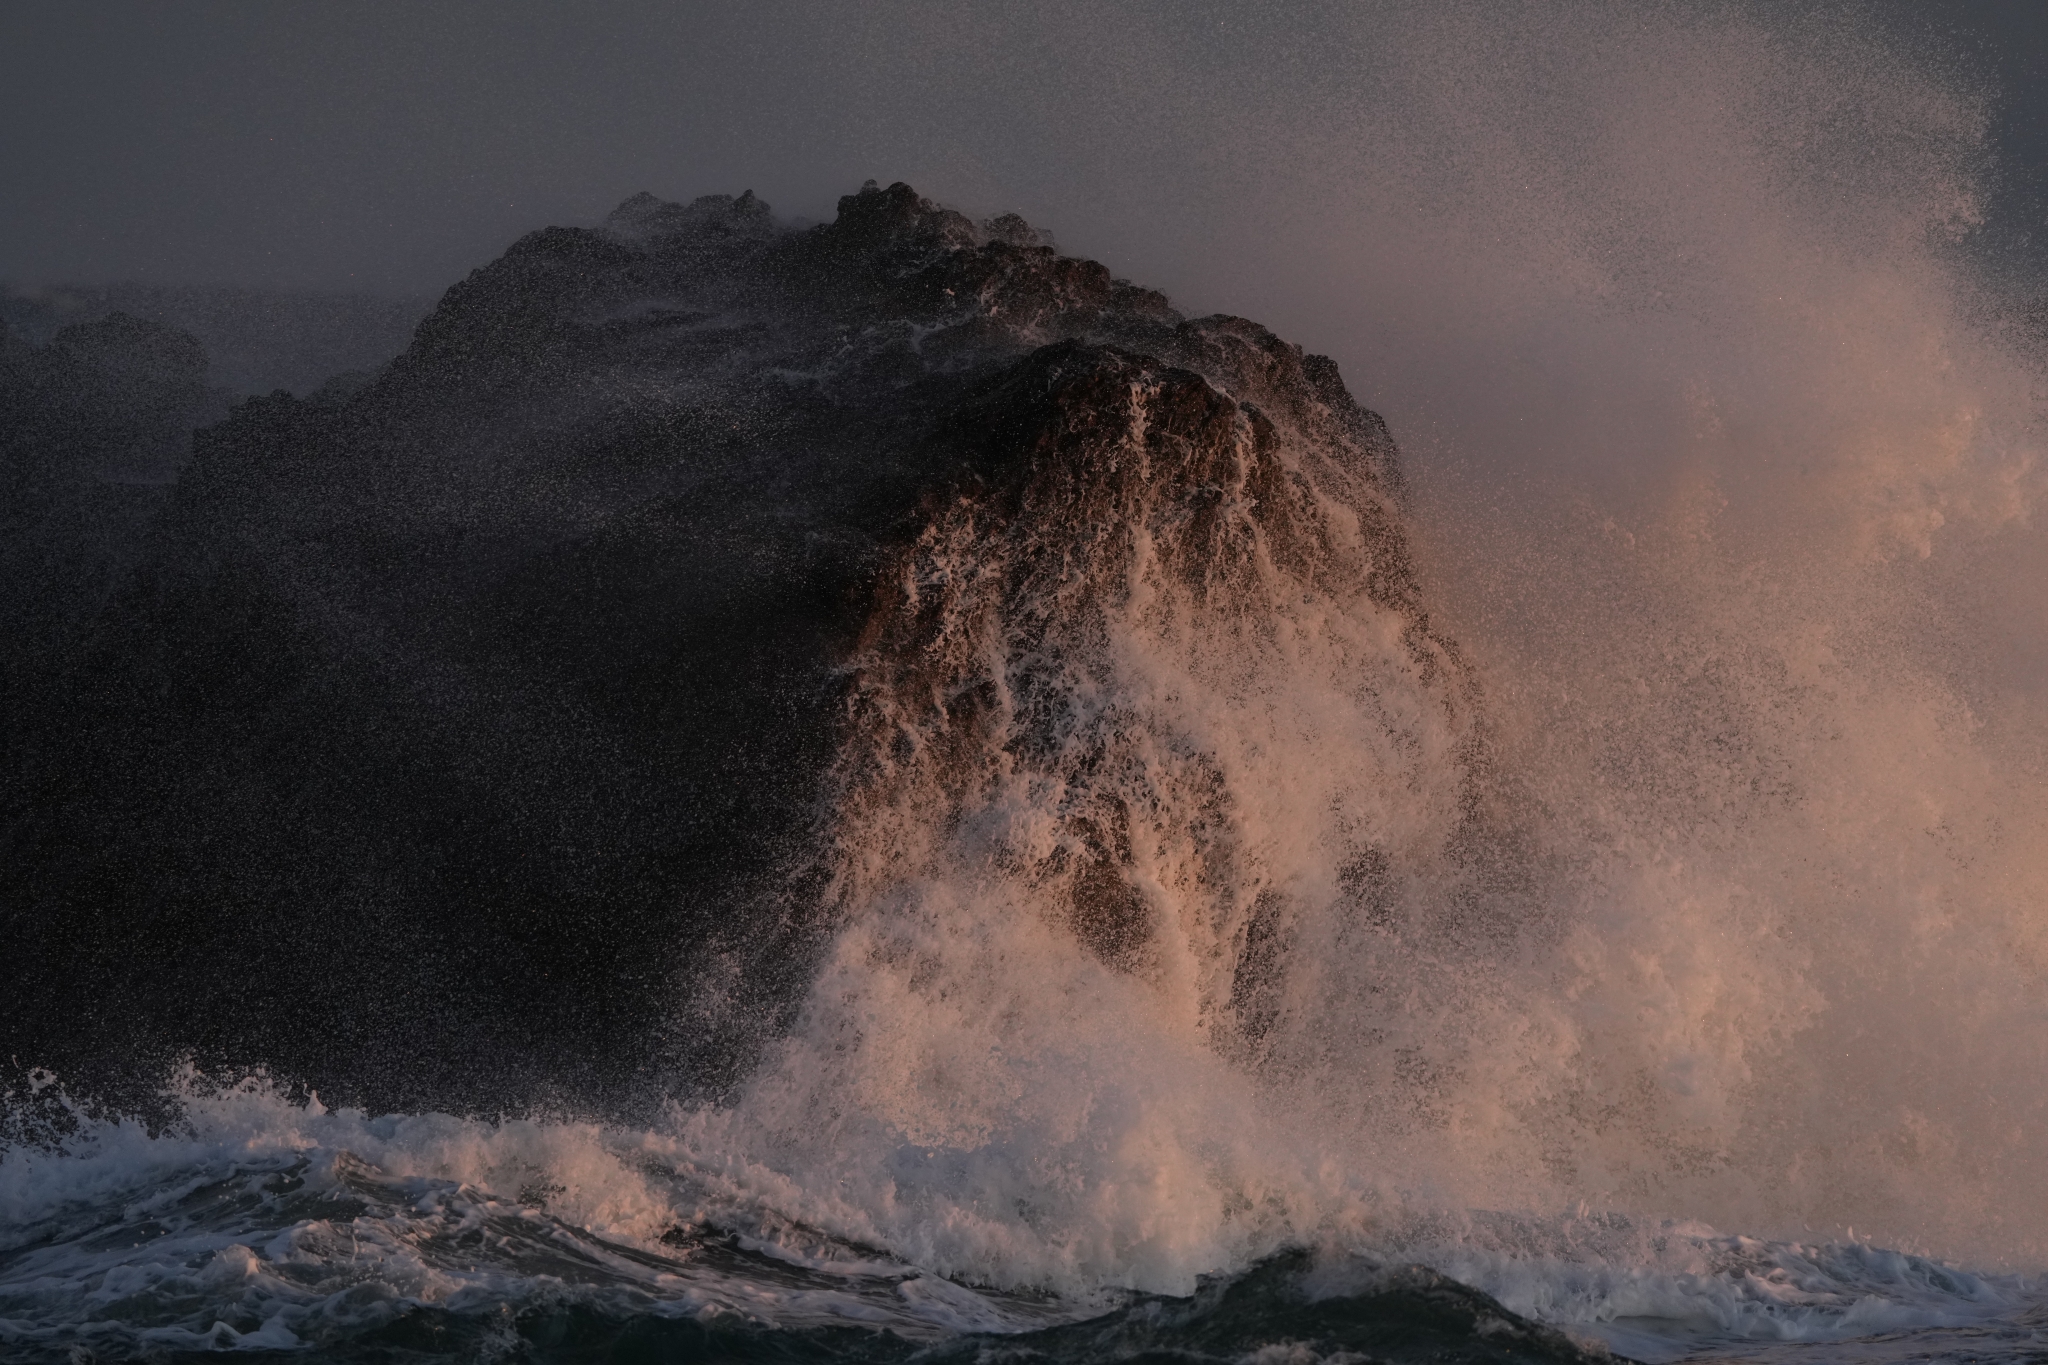 Waves breaking against a large rock